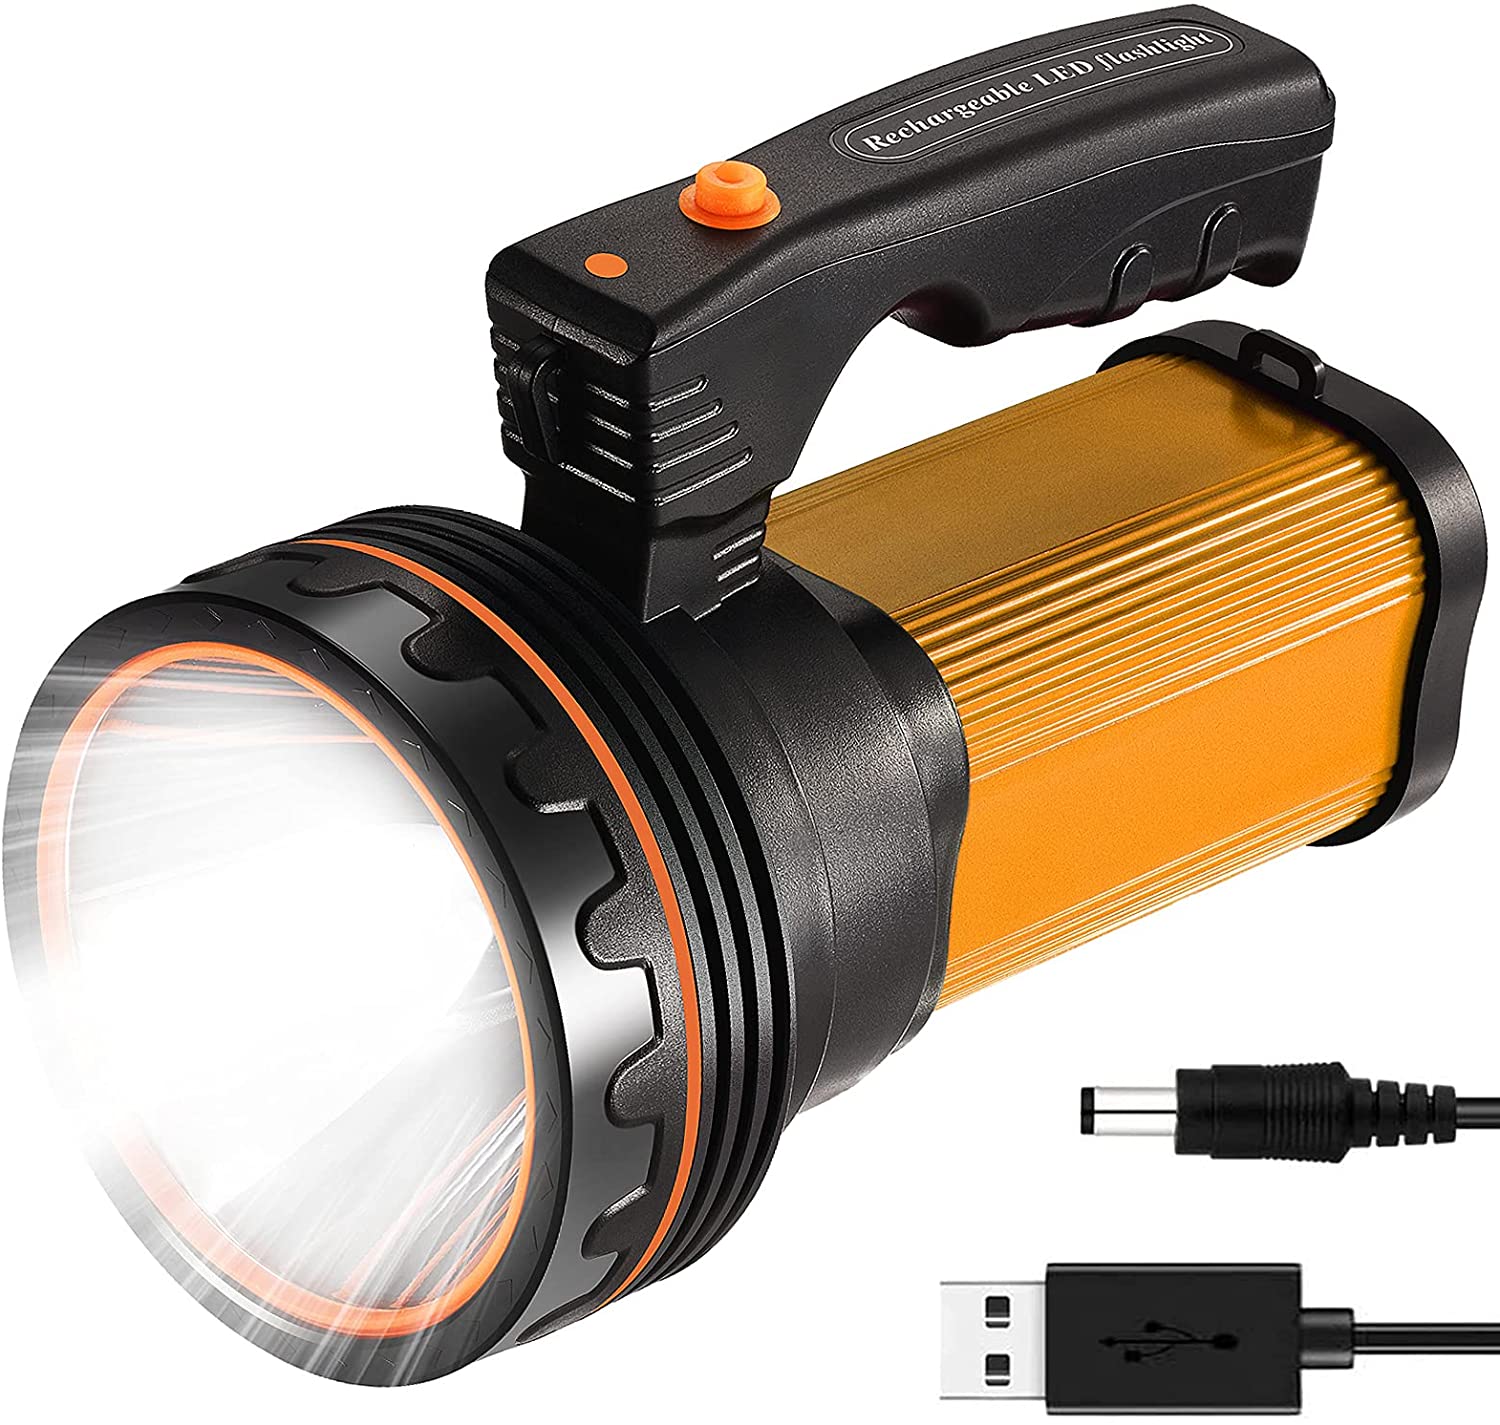 CSNDICE 35W Rechargeable Handheld Flashlight and charger cable on white background.